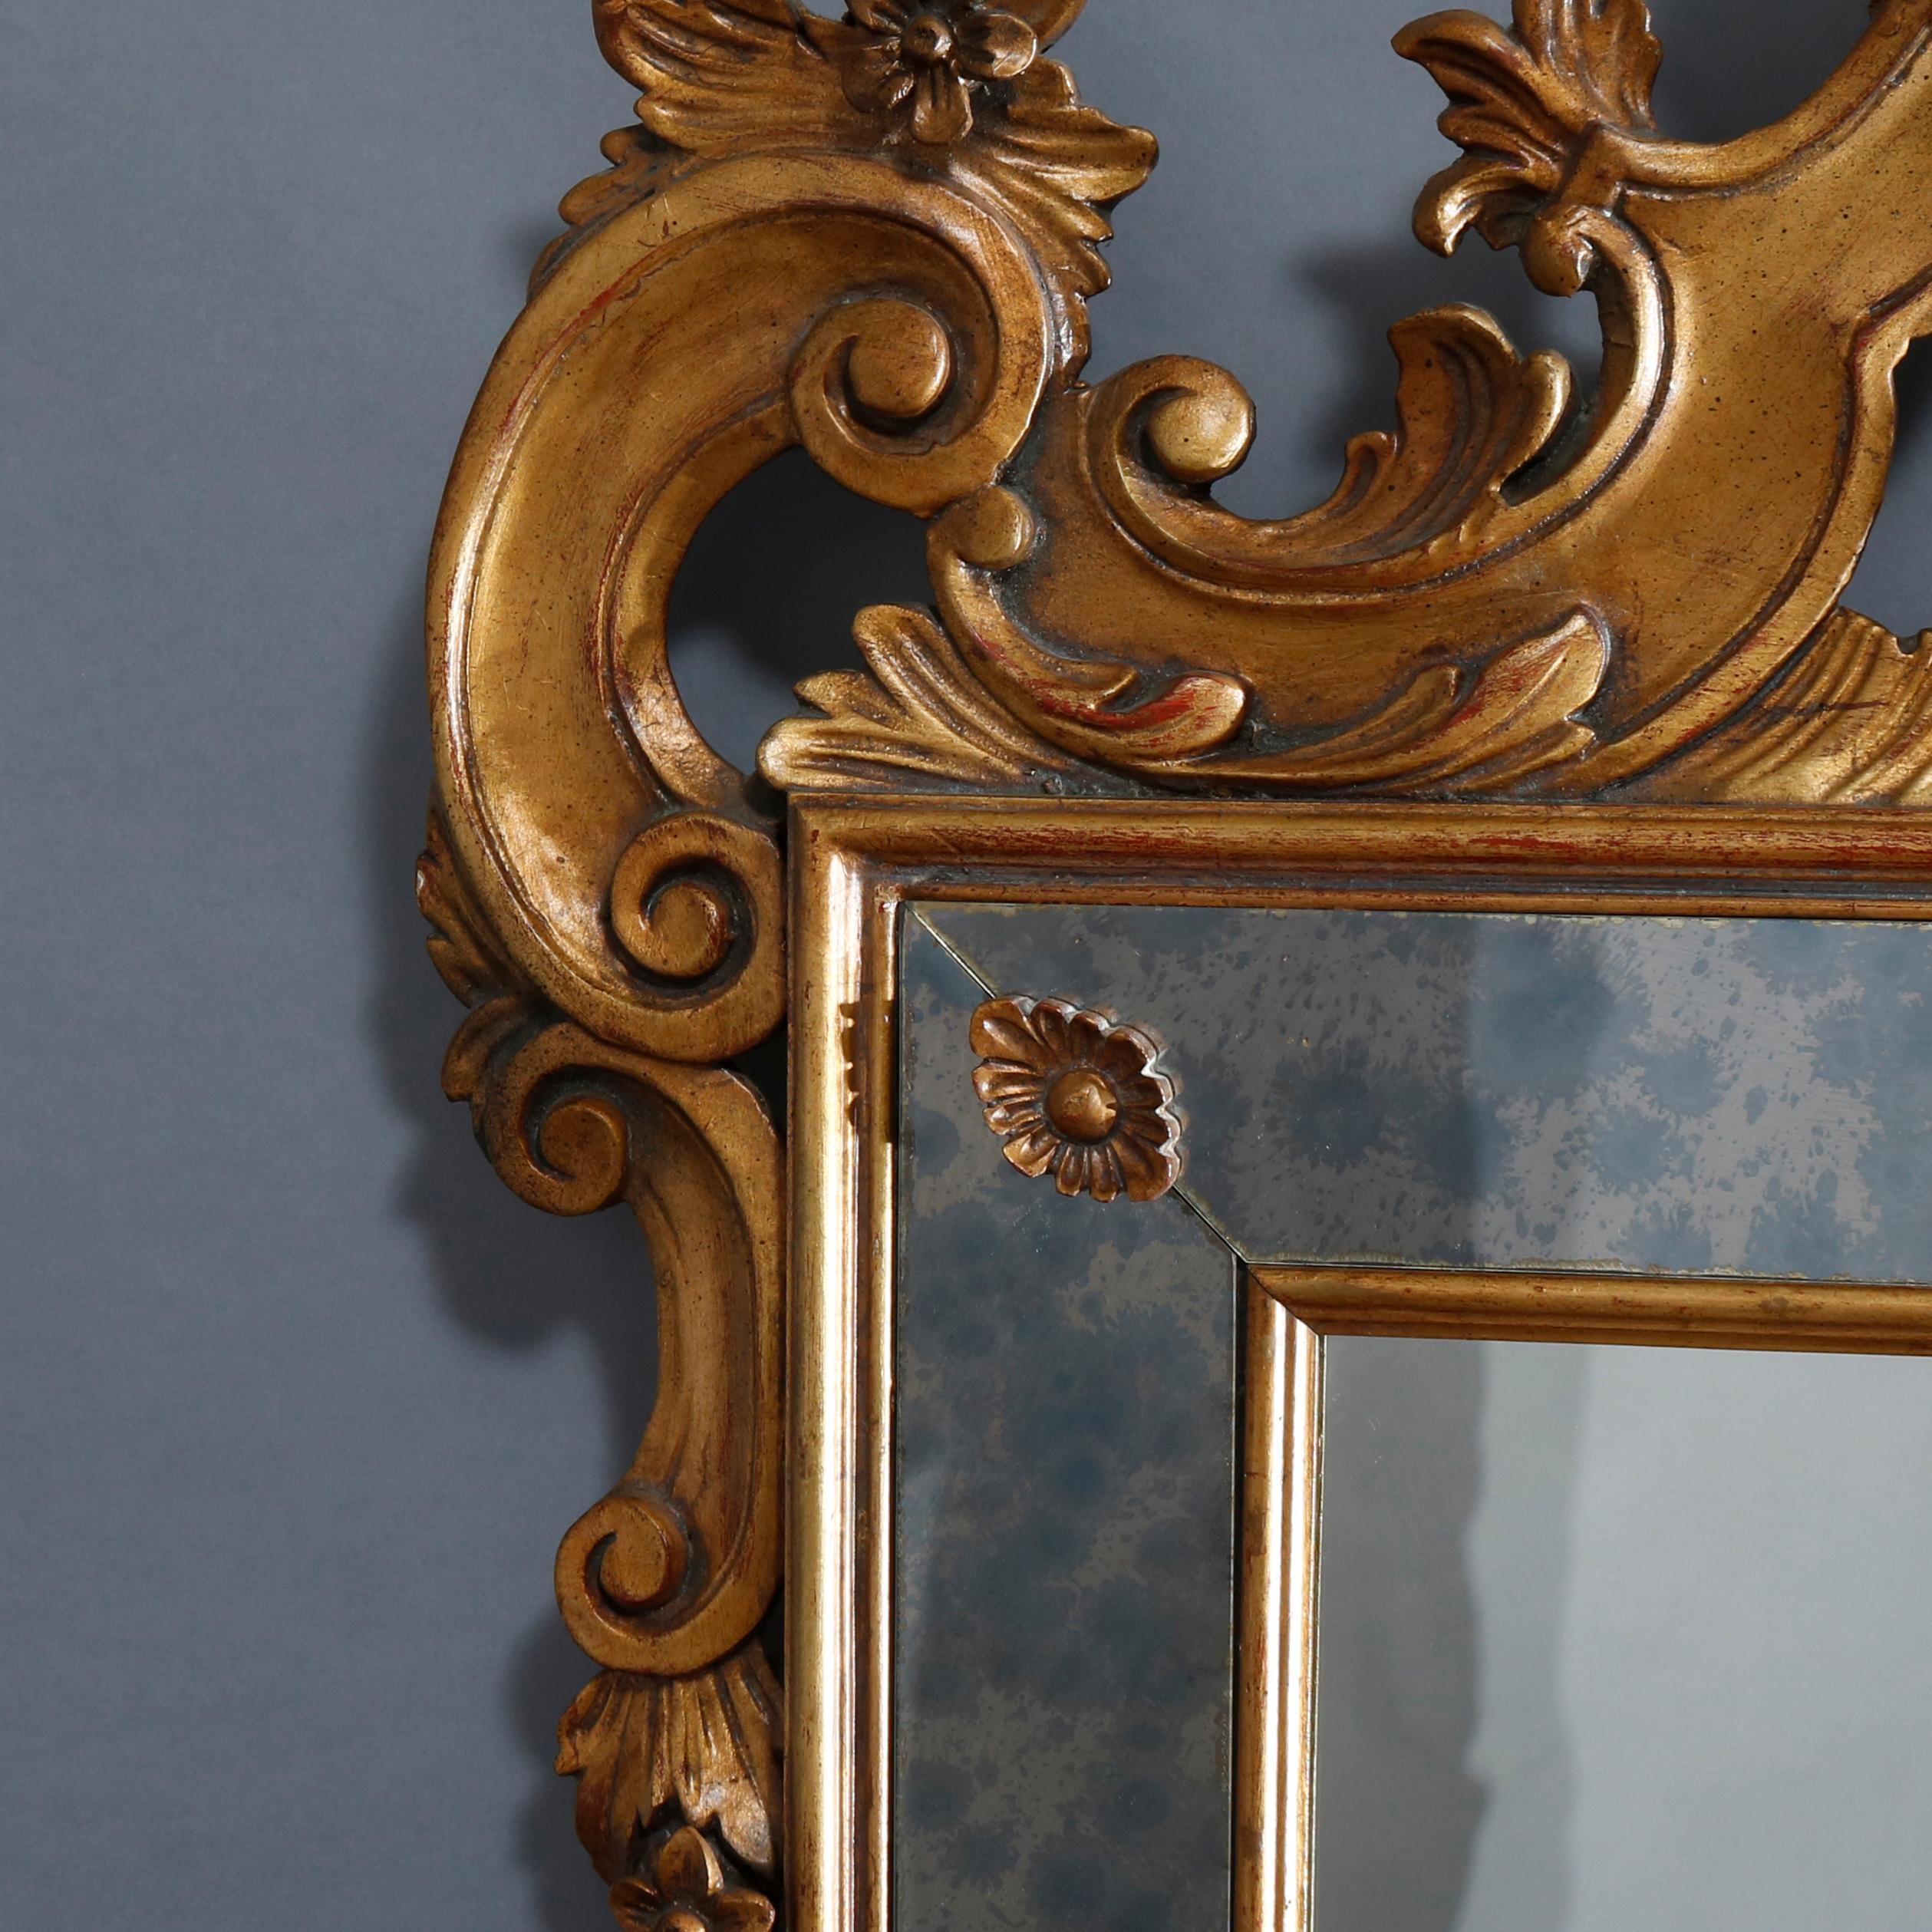 American Vintage Italian Rococo Style Giltwood Parclose Over Mantel Mirror by Karges